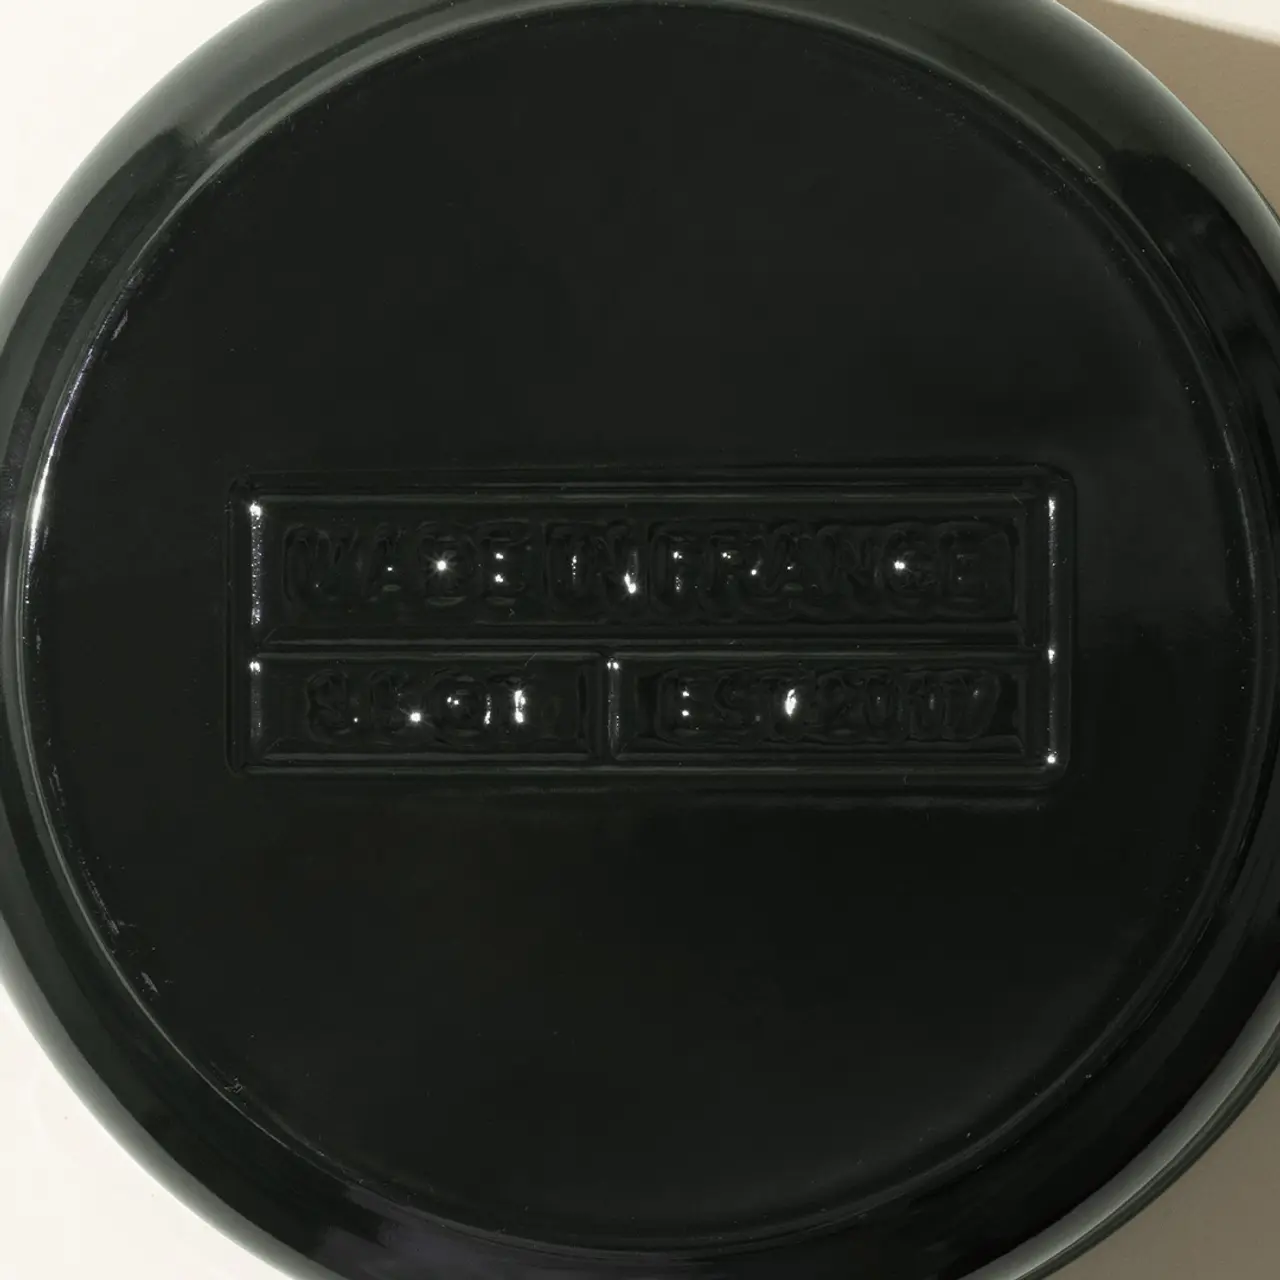 A black round object with an embossed design in the center that seems to be text or a logo, but is not clear due to the angle and lighting.